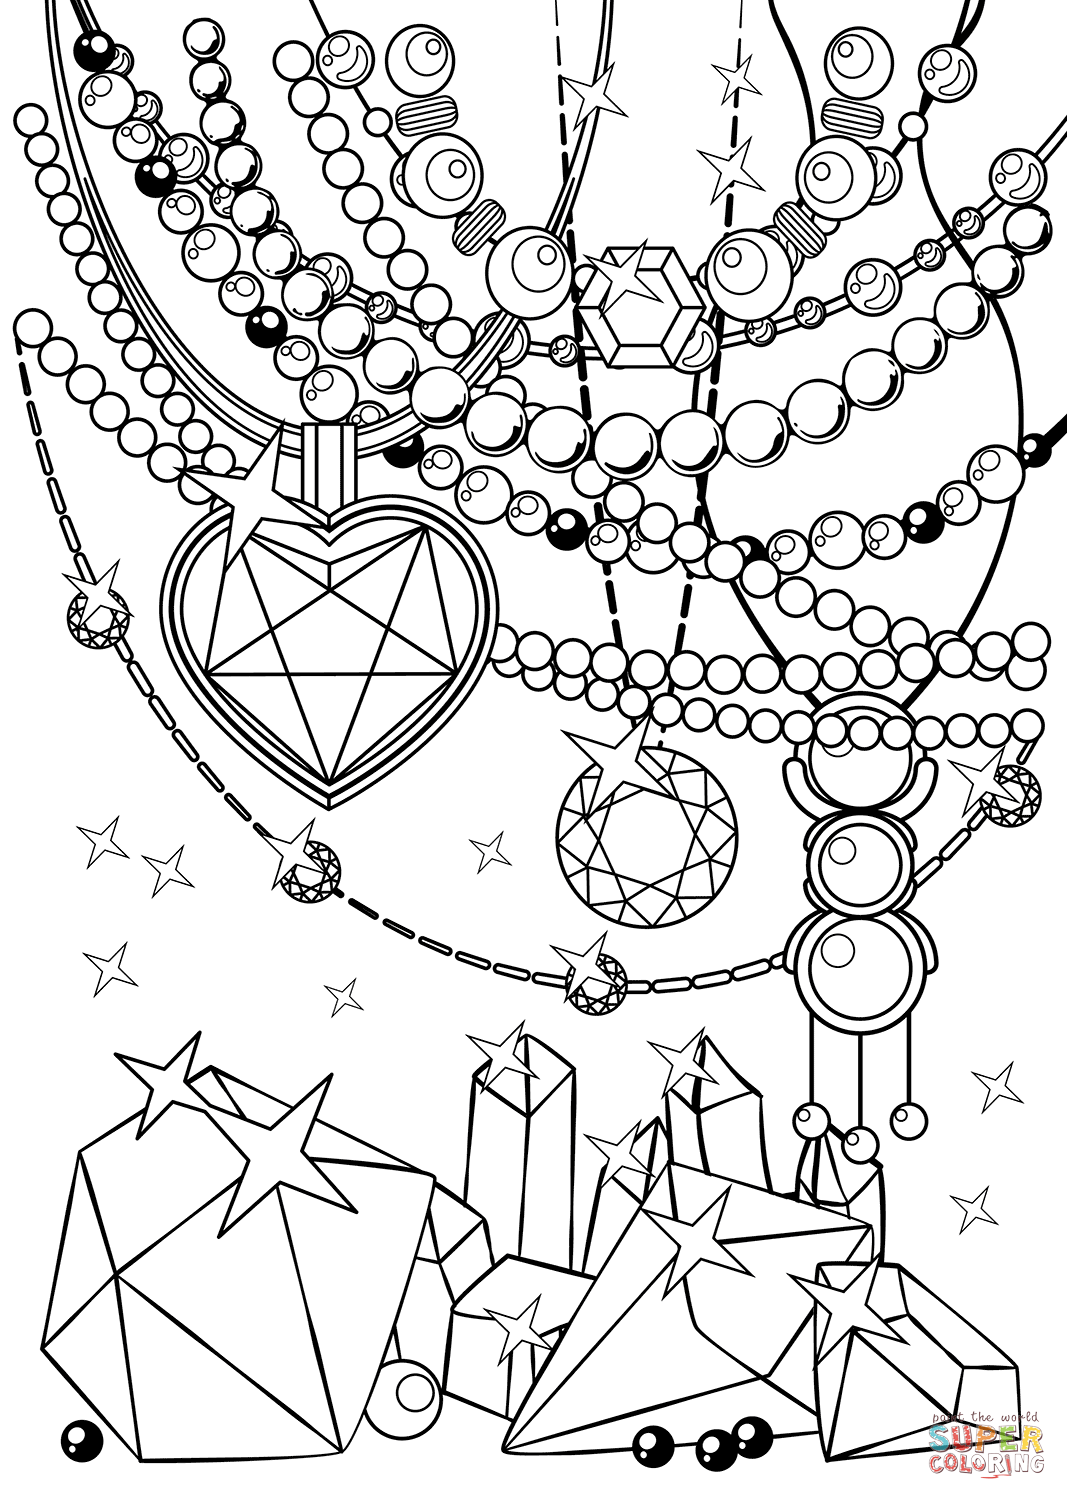 Beads and Crystals coloring page | Free Printable Coloring Pages